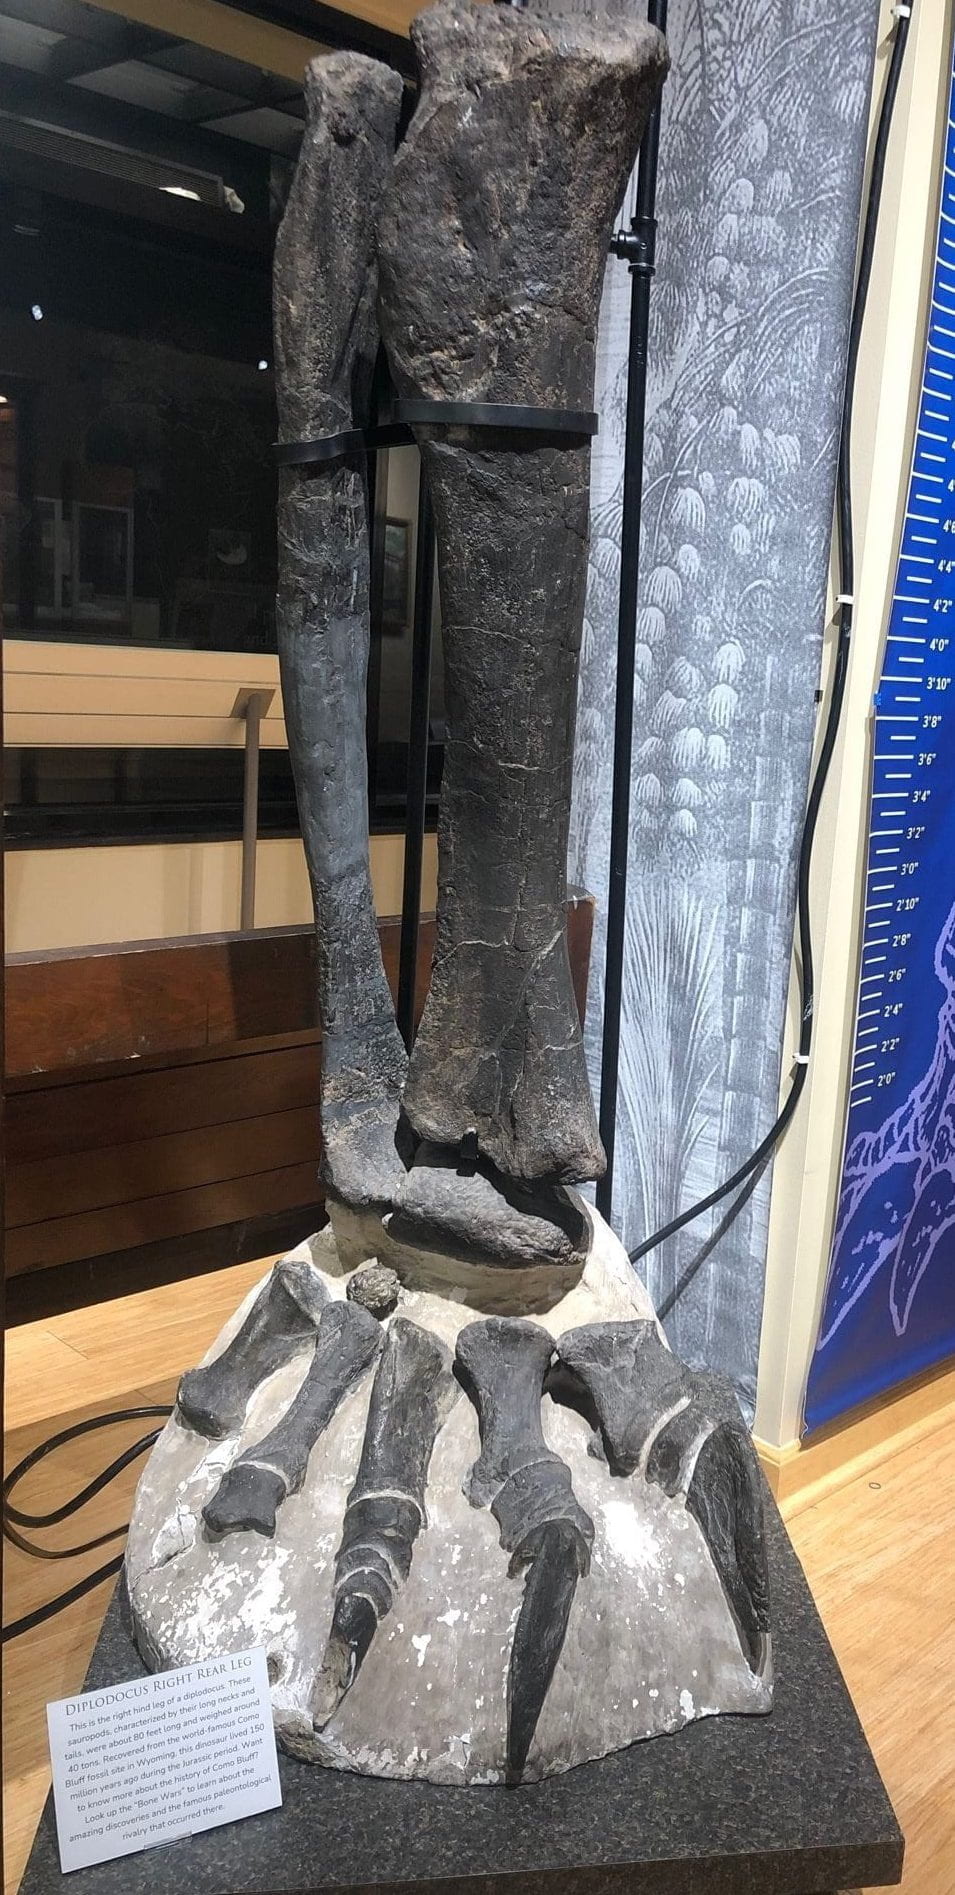 A black, fossilized dinosaur leg and foot that reaches 5 feet 10 inches tall on a nearby blue height scale.